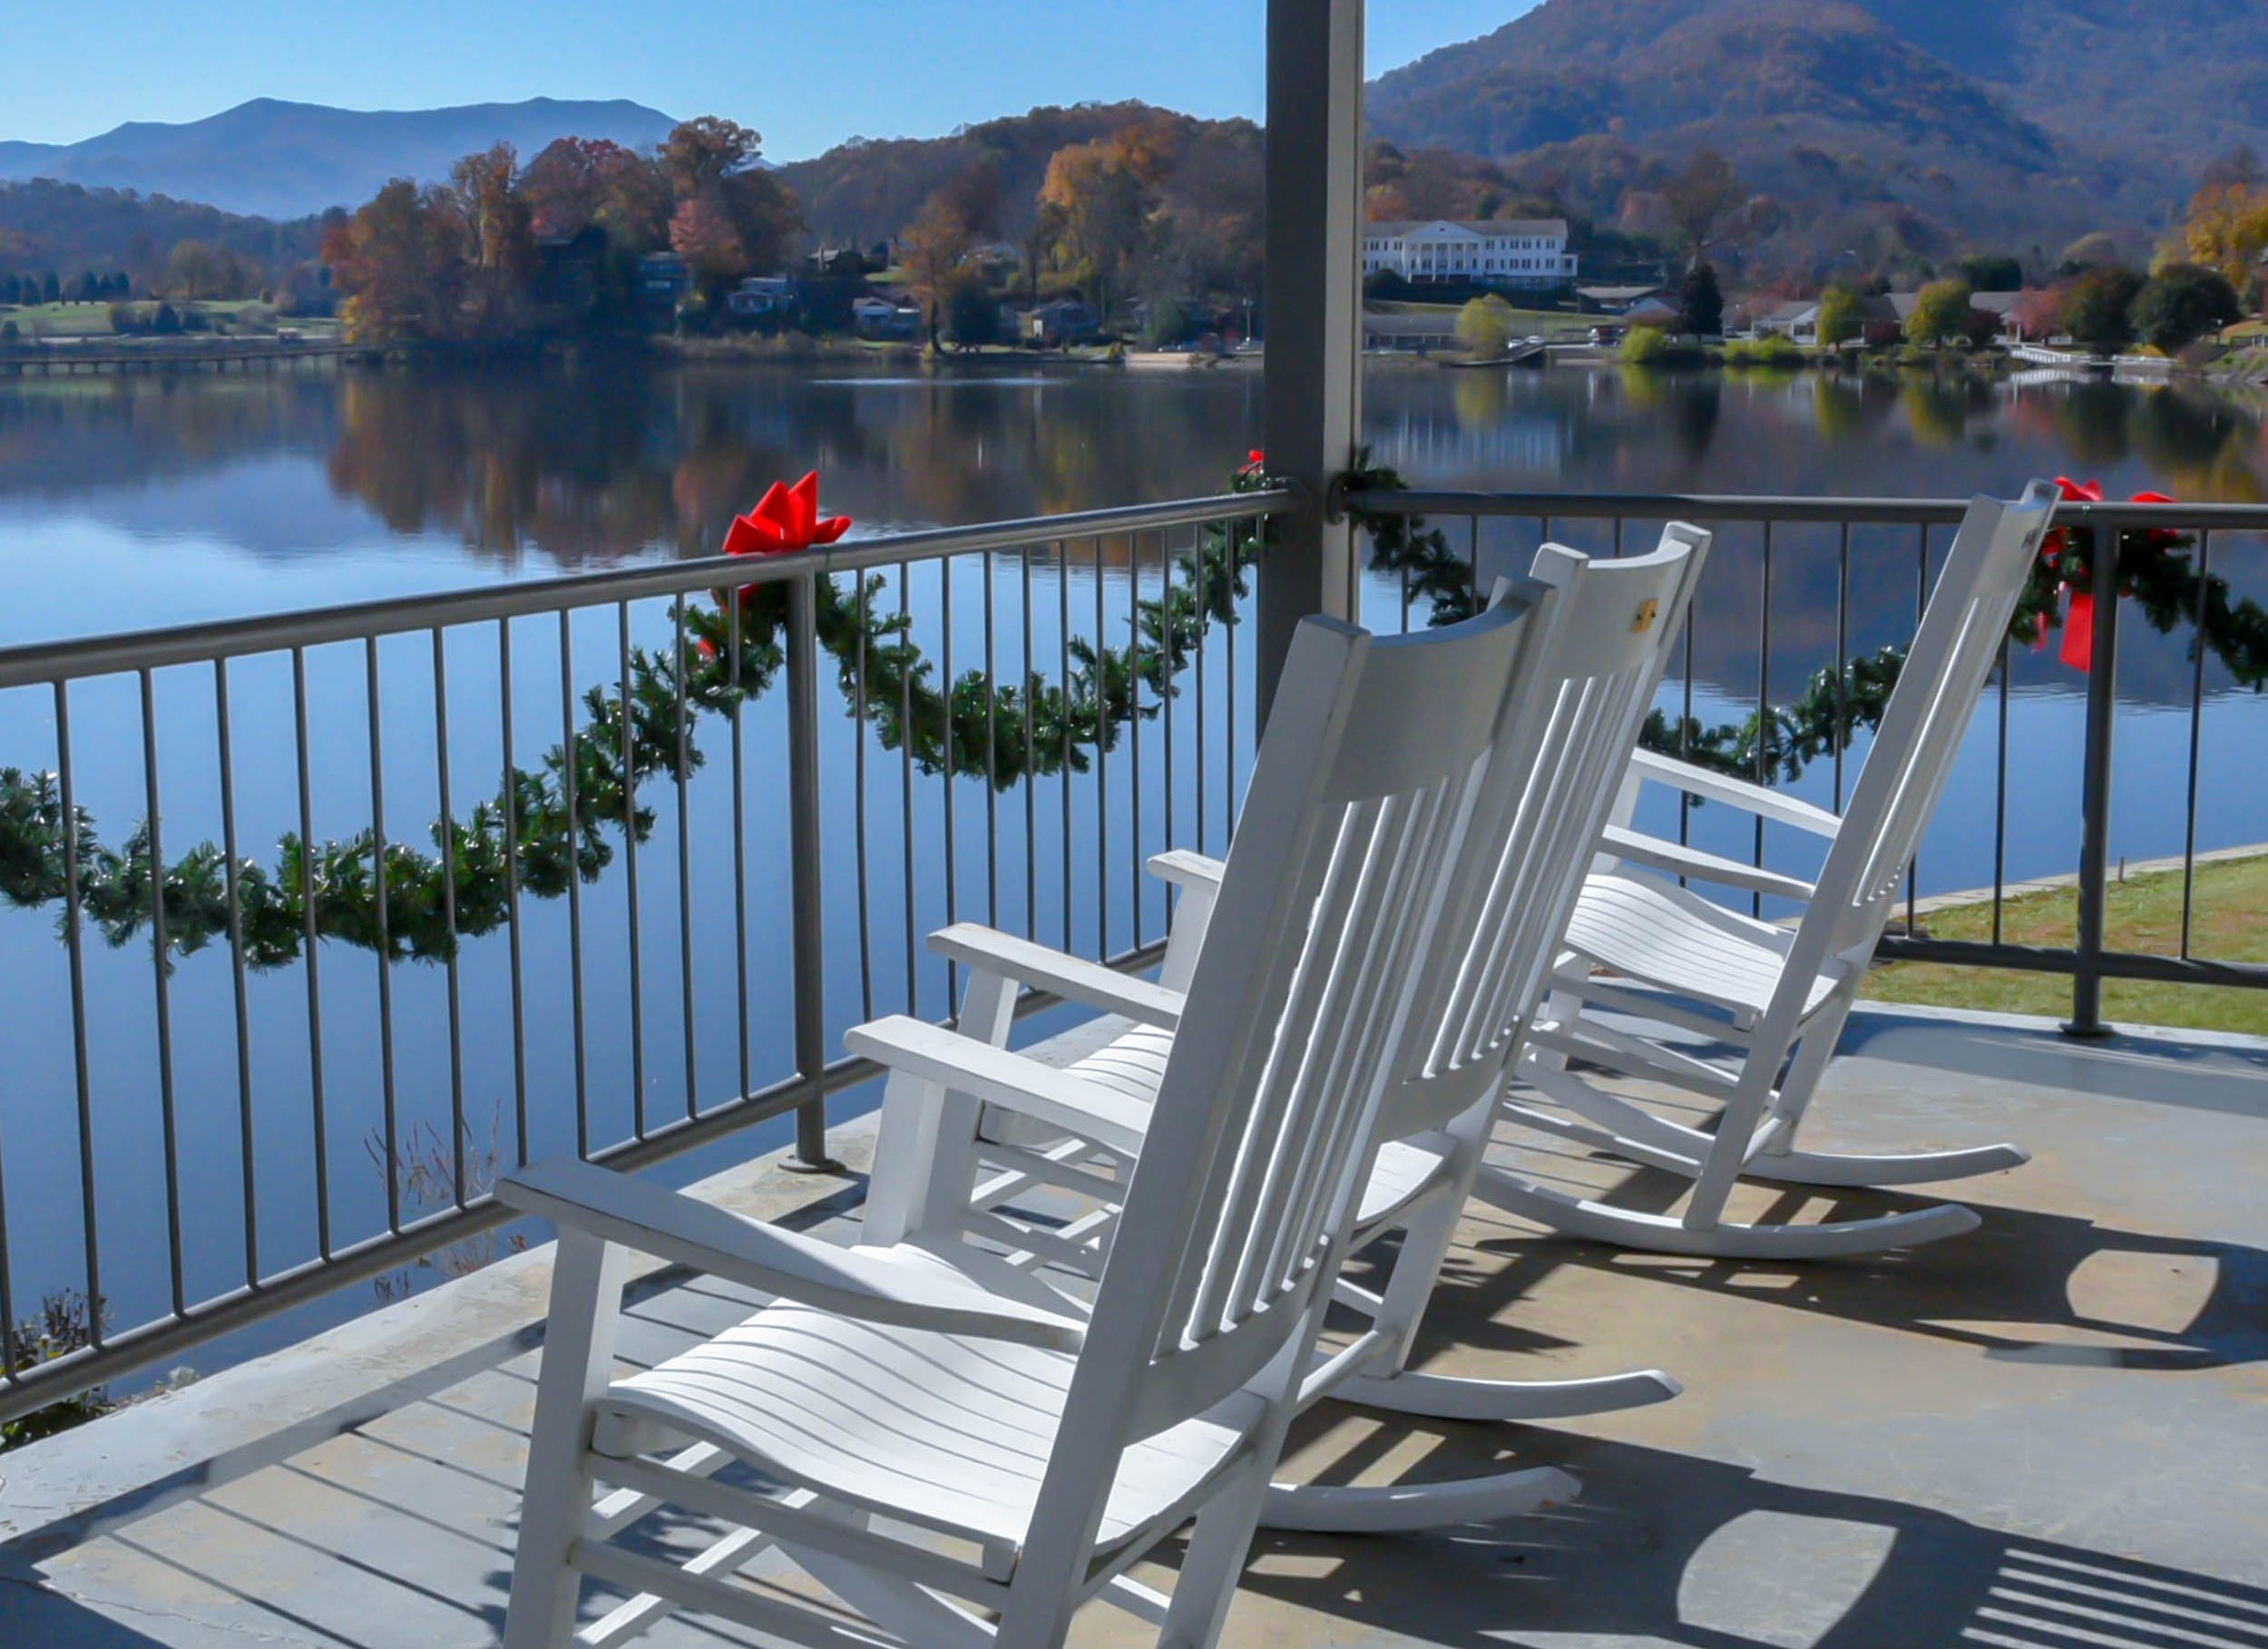 Rocking chairs with holiday decorations